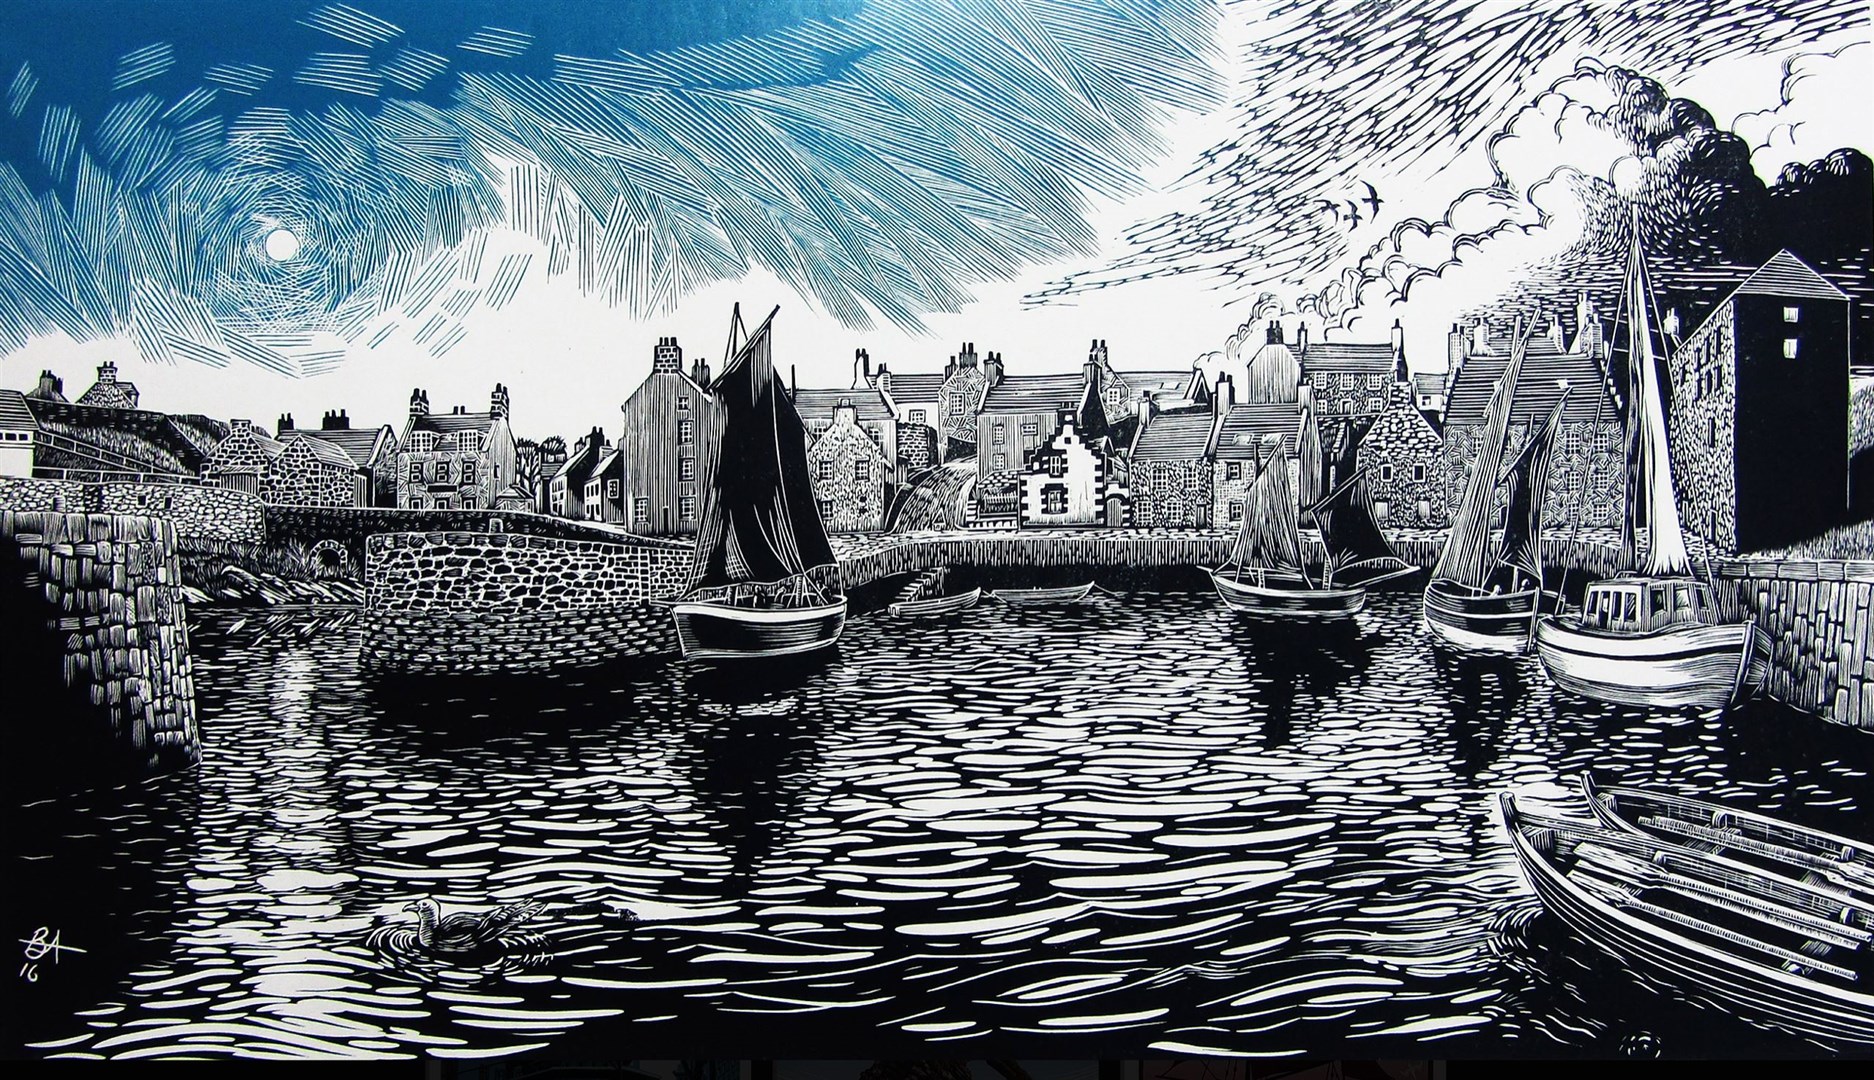 Sailing Day, Portsoy, by Bryan Angus which is one of the works on show at the exhibition now open to the public.